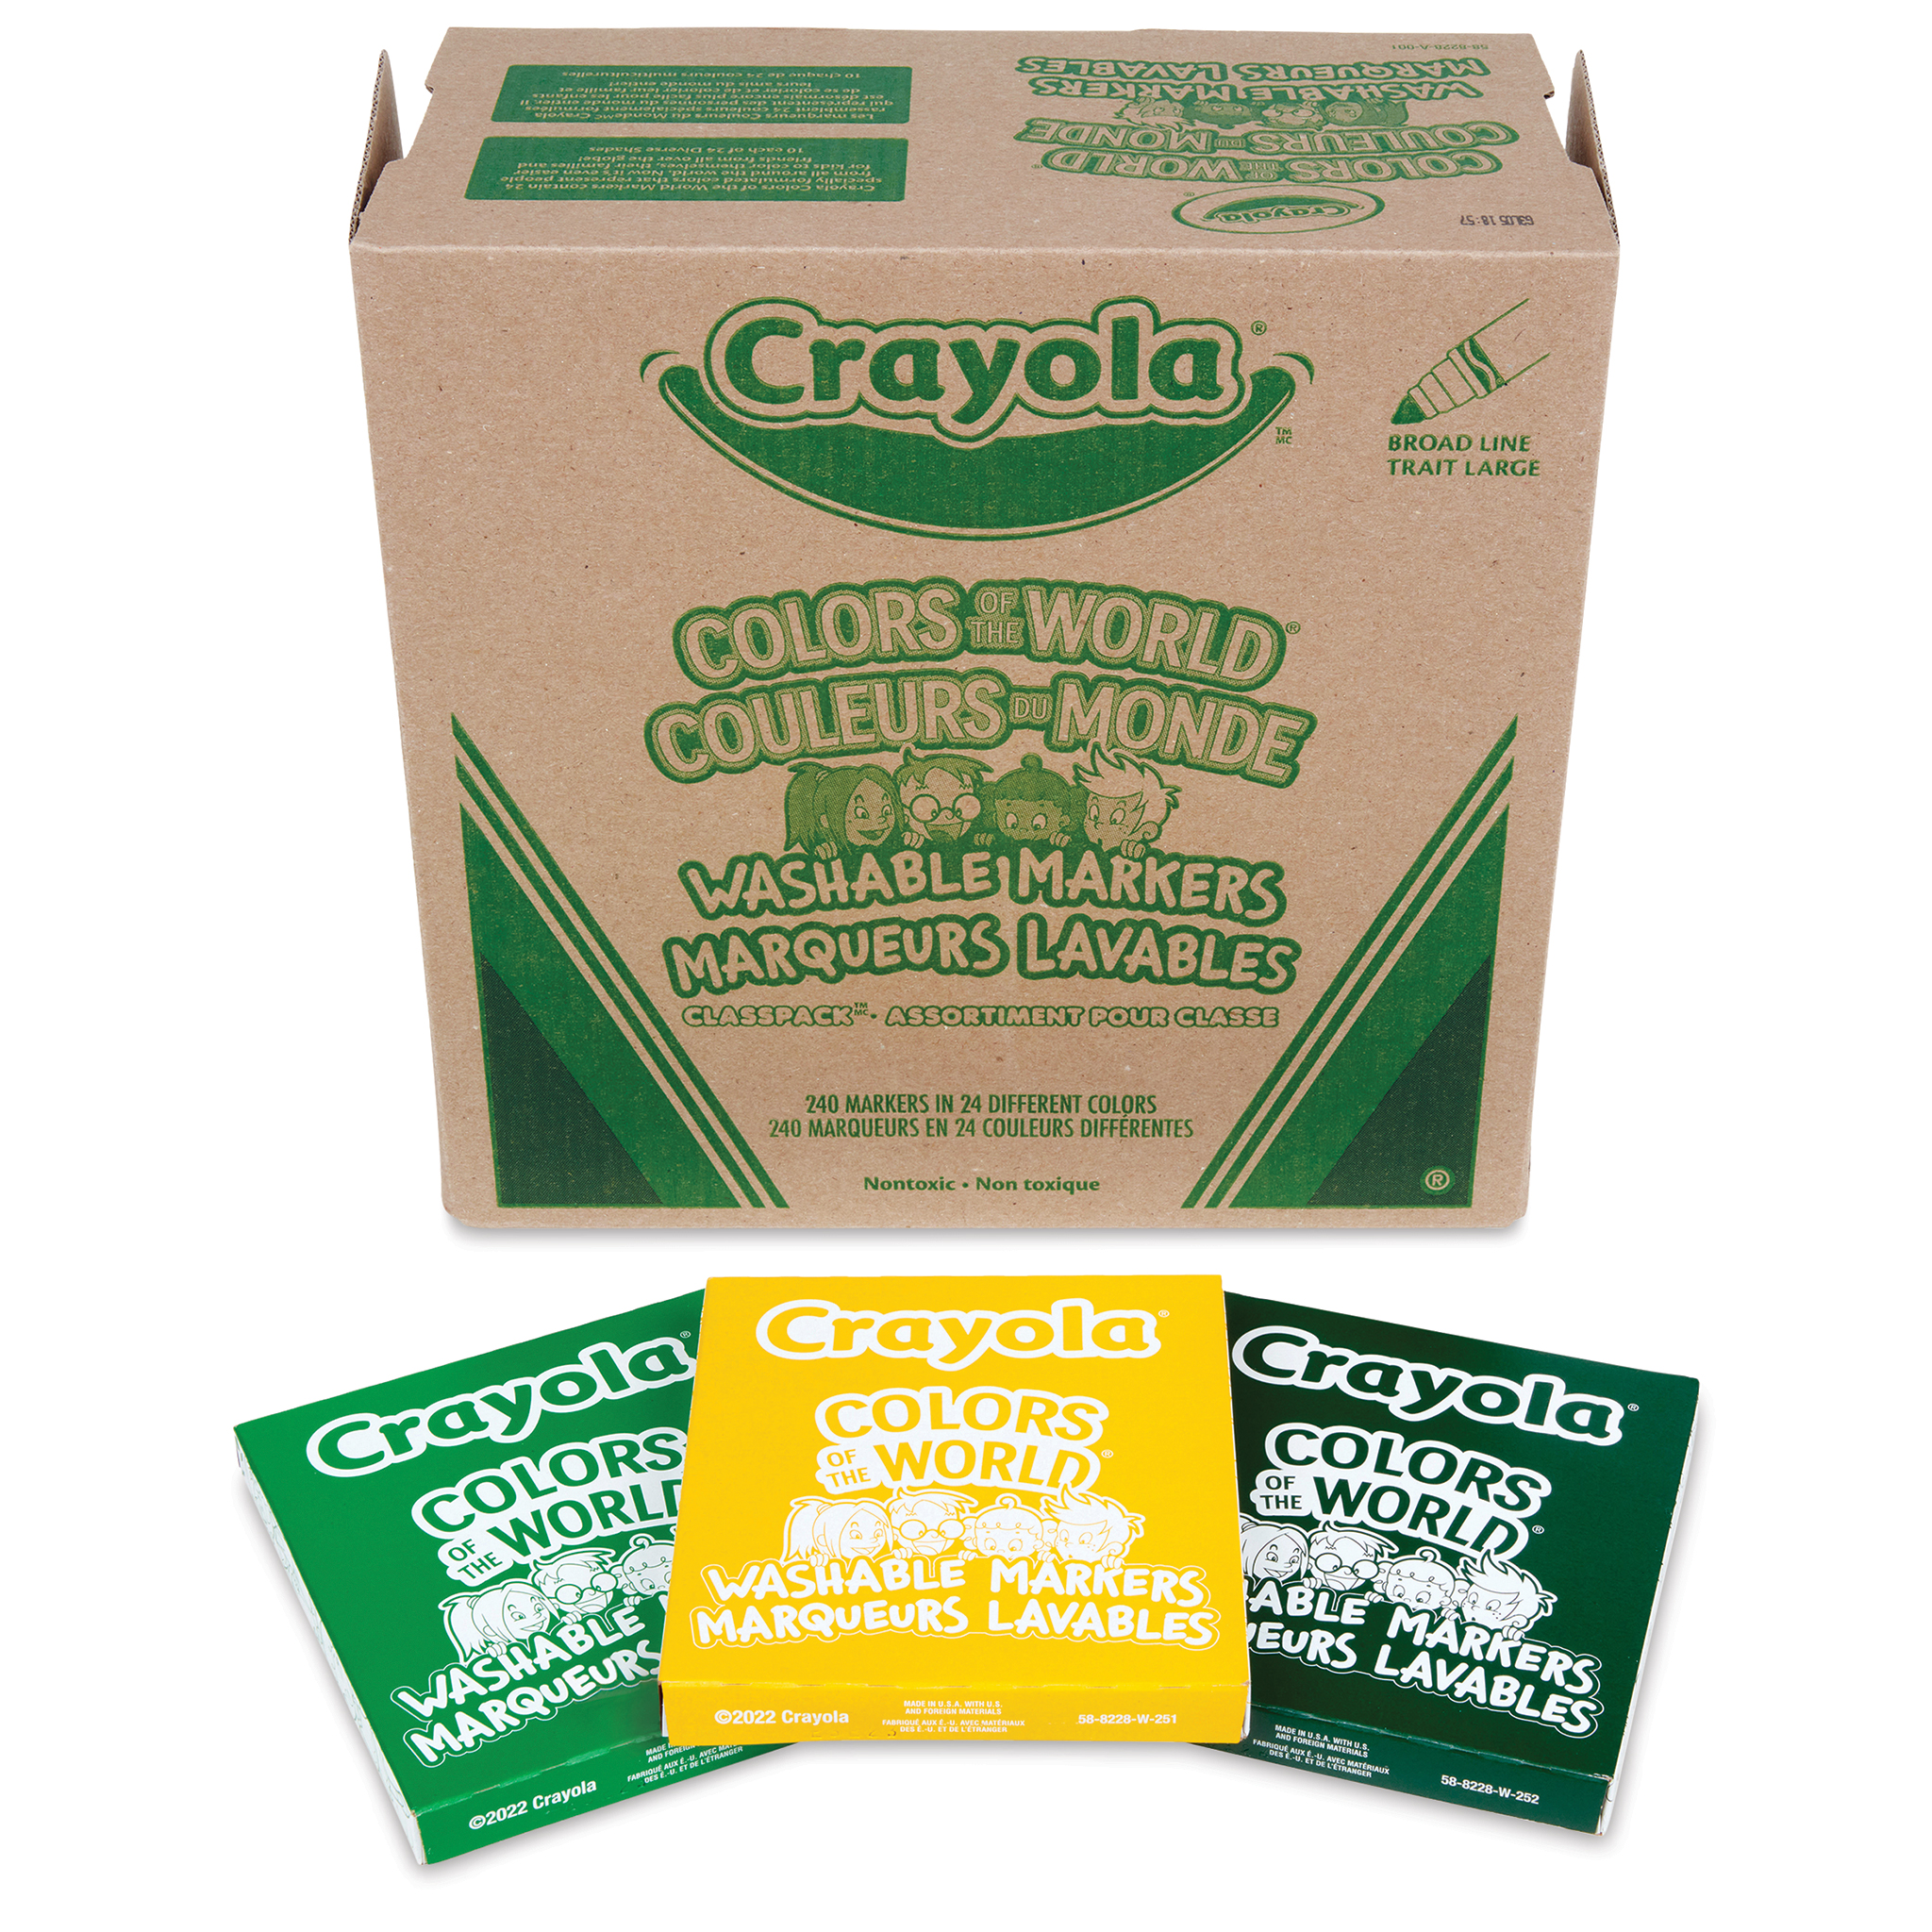 Crayola Colors of the World Colored Pencil Sets